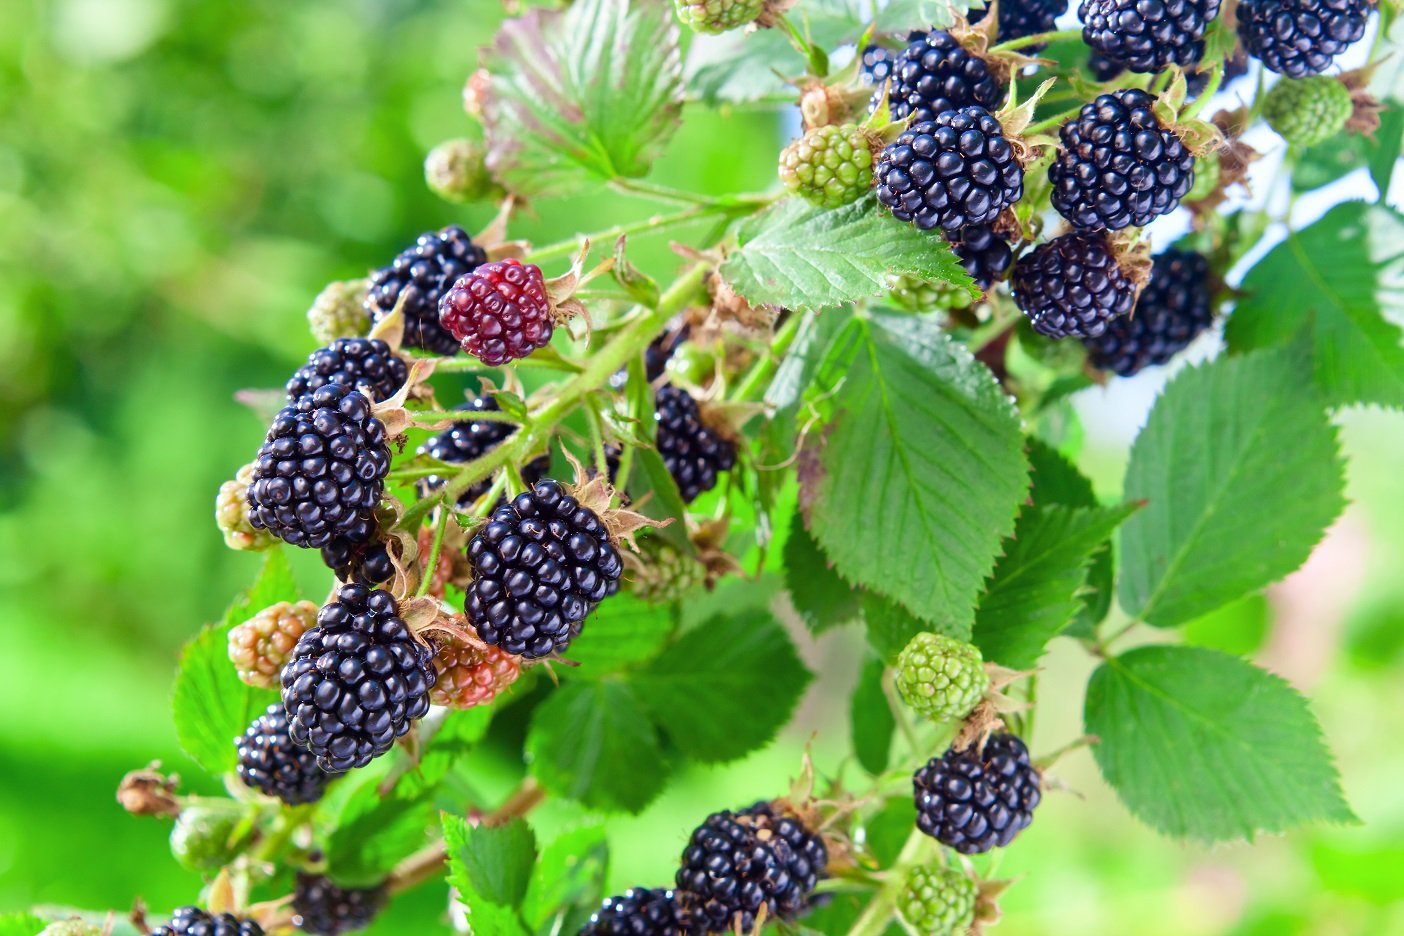 Fruits you can farm and grow in a greenhouse: Blackberries